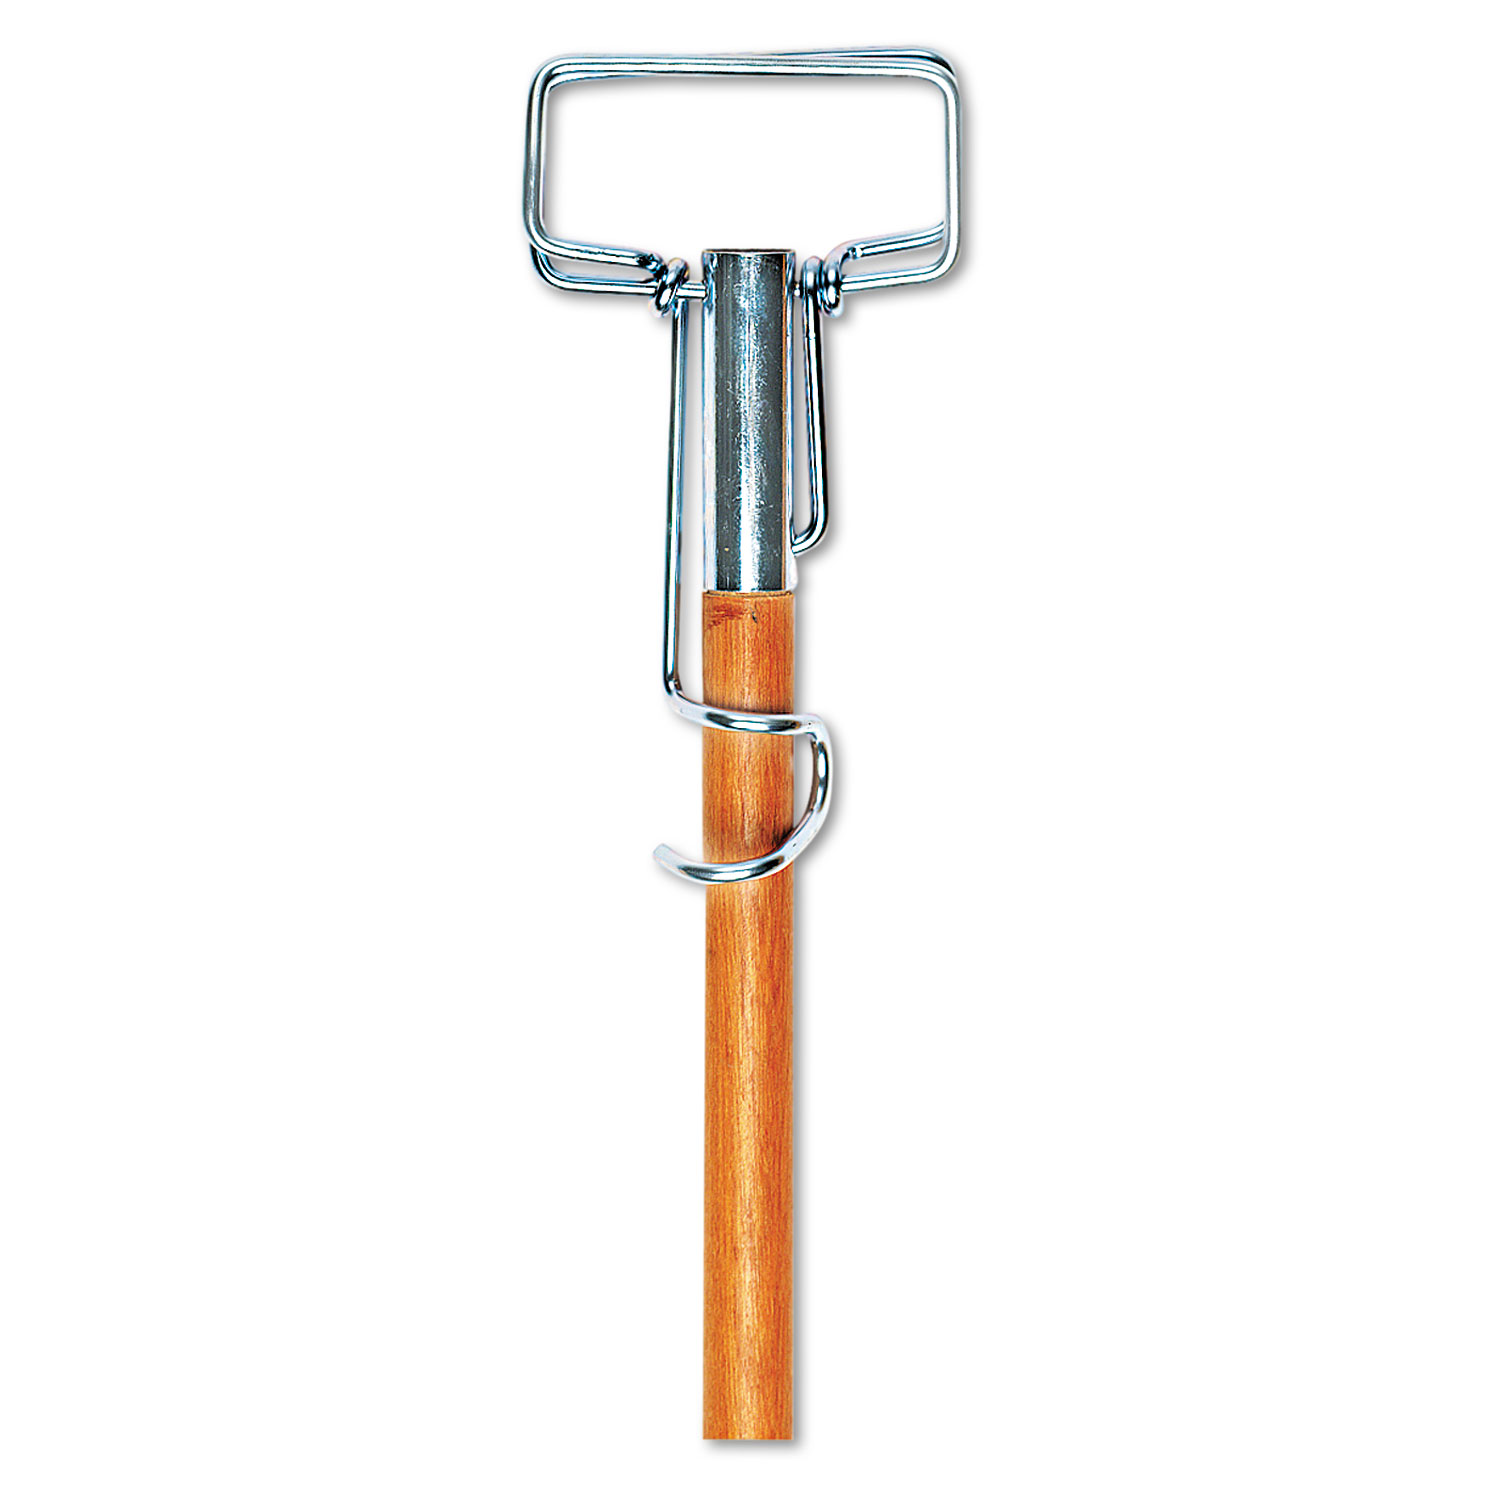 Spring Grip Metal Head Mop Handle for Most Mop Heads - 60